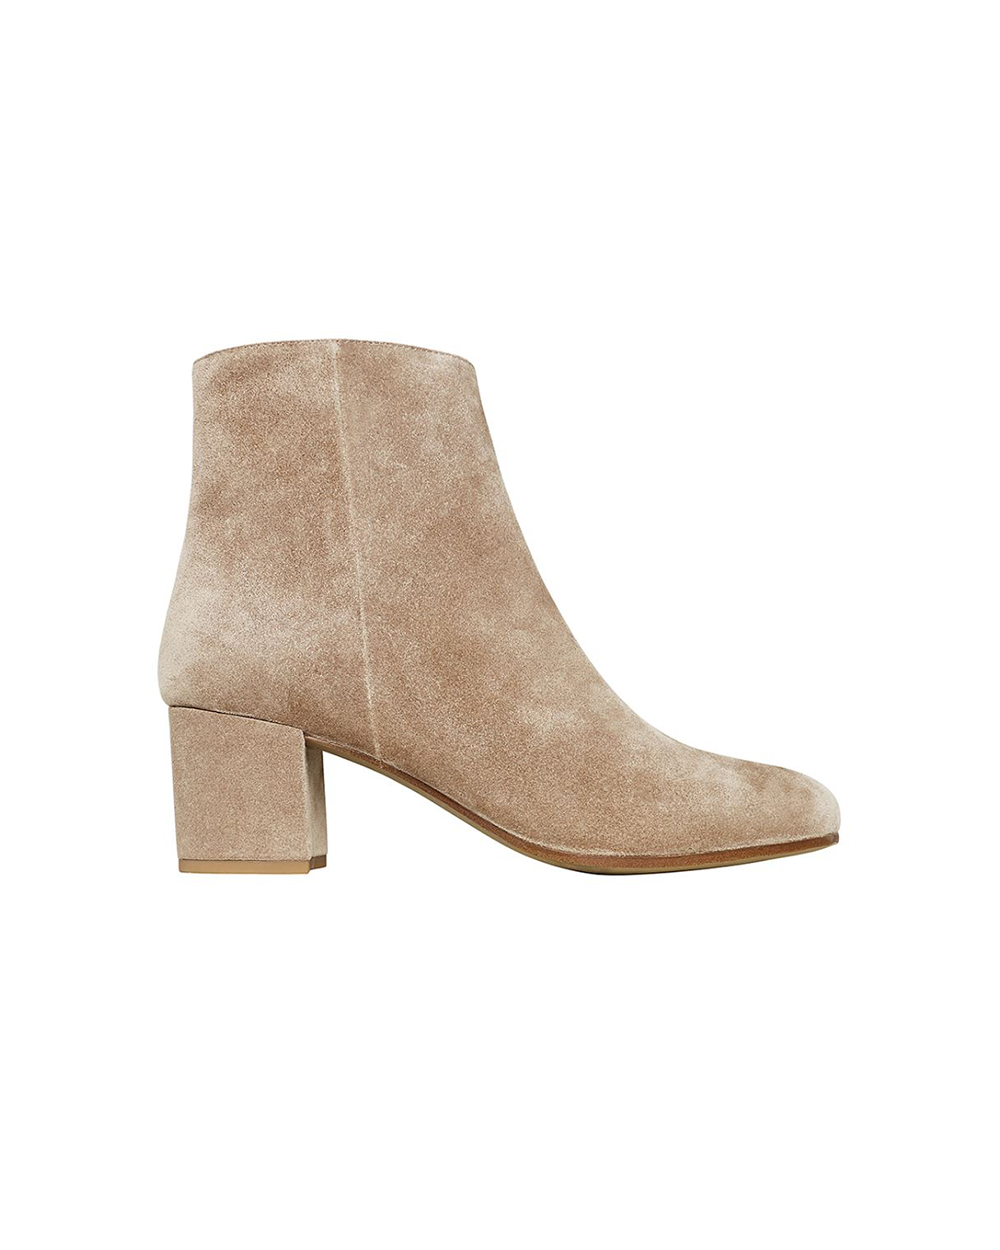 Jenny Block Boot, $269.90, from Seed Heritage